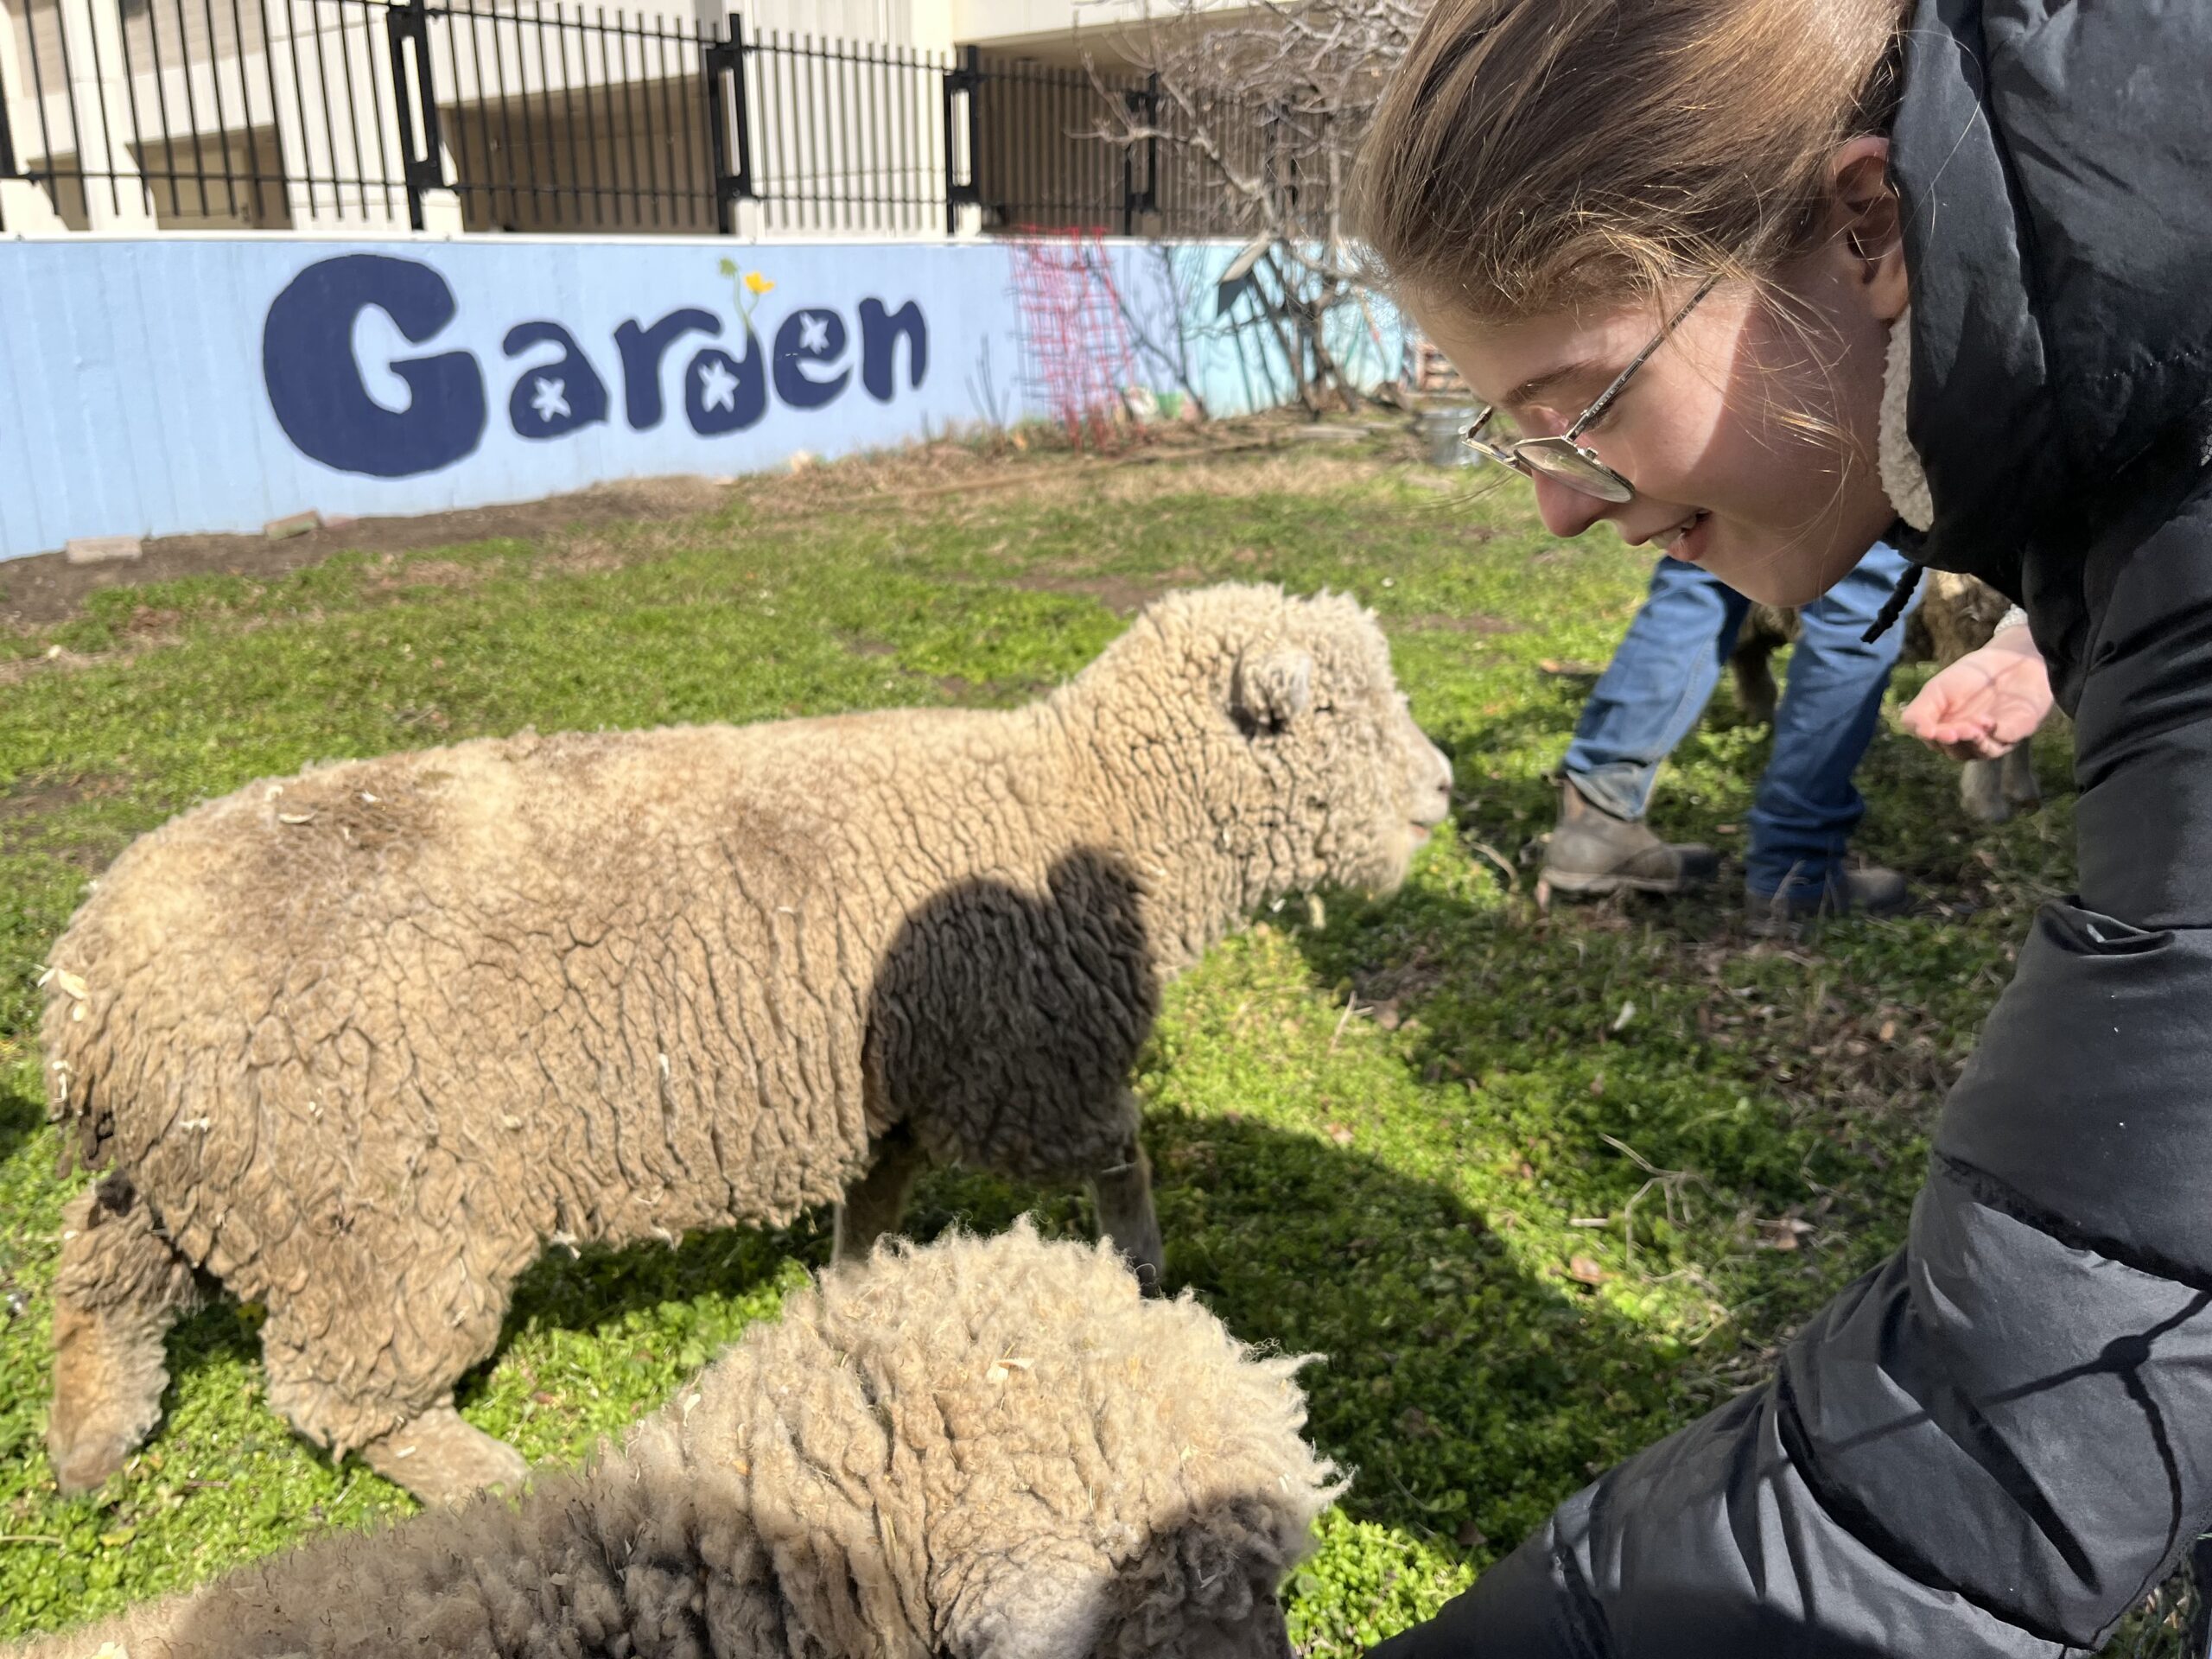 A student at GW leans down to engage with one of the Lambmowers sheep at the GroW Garden.